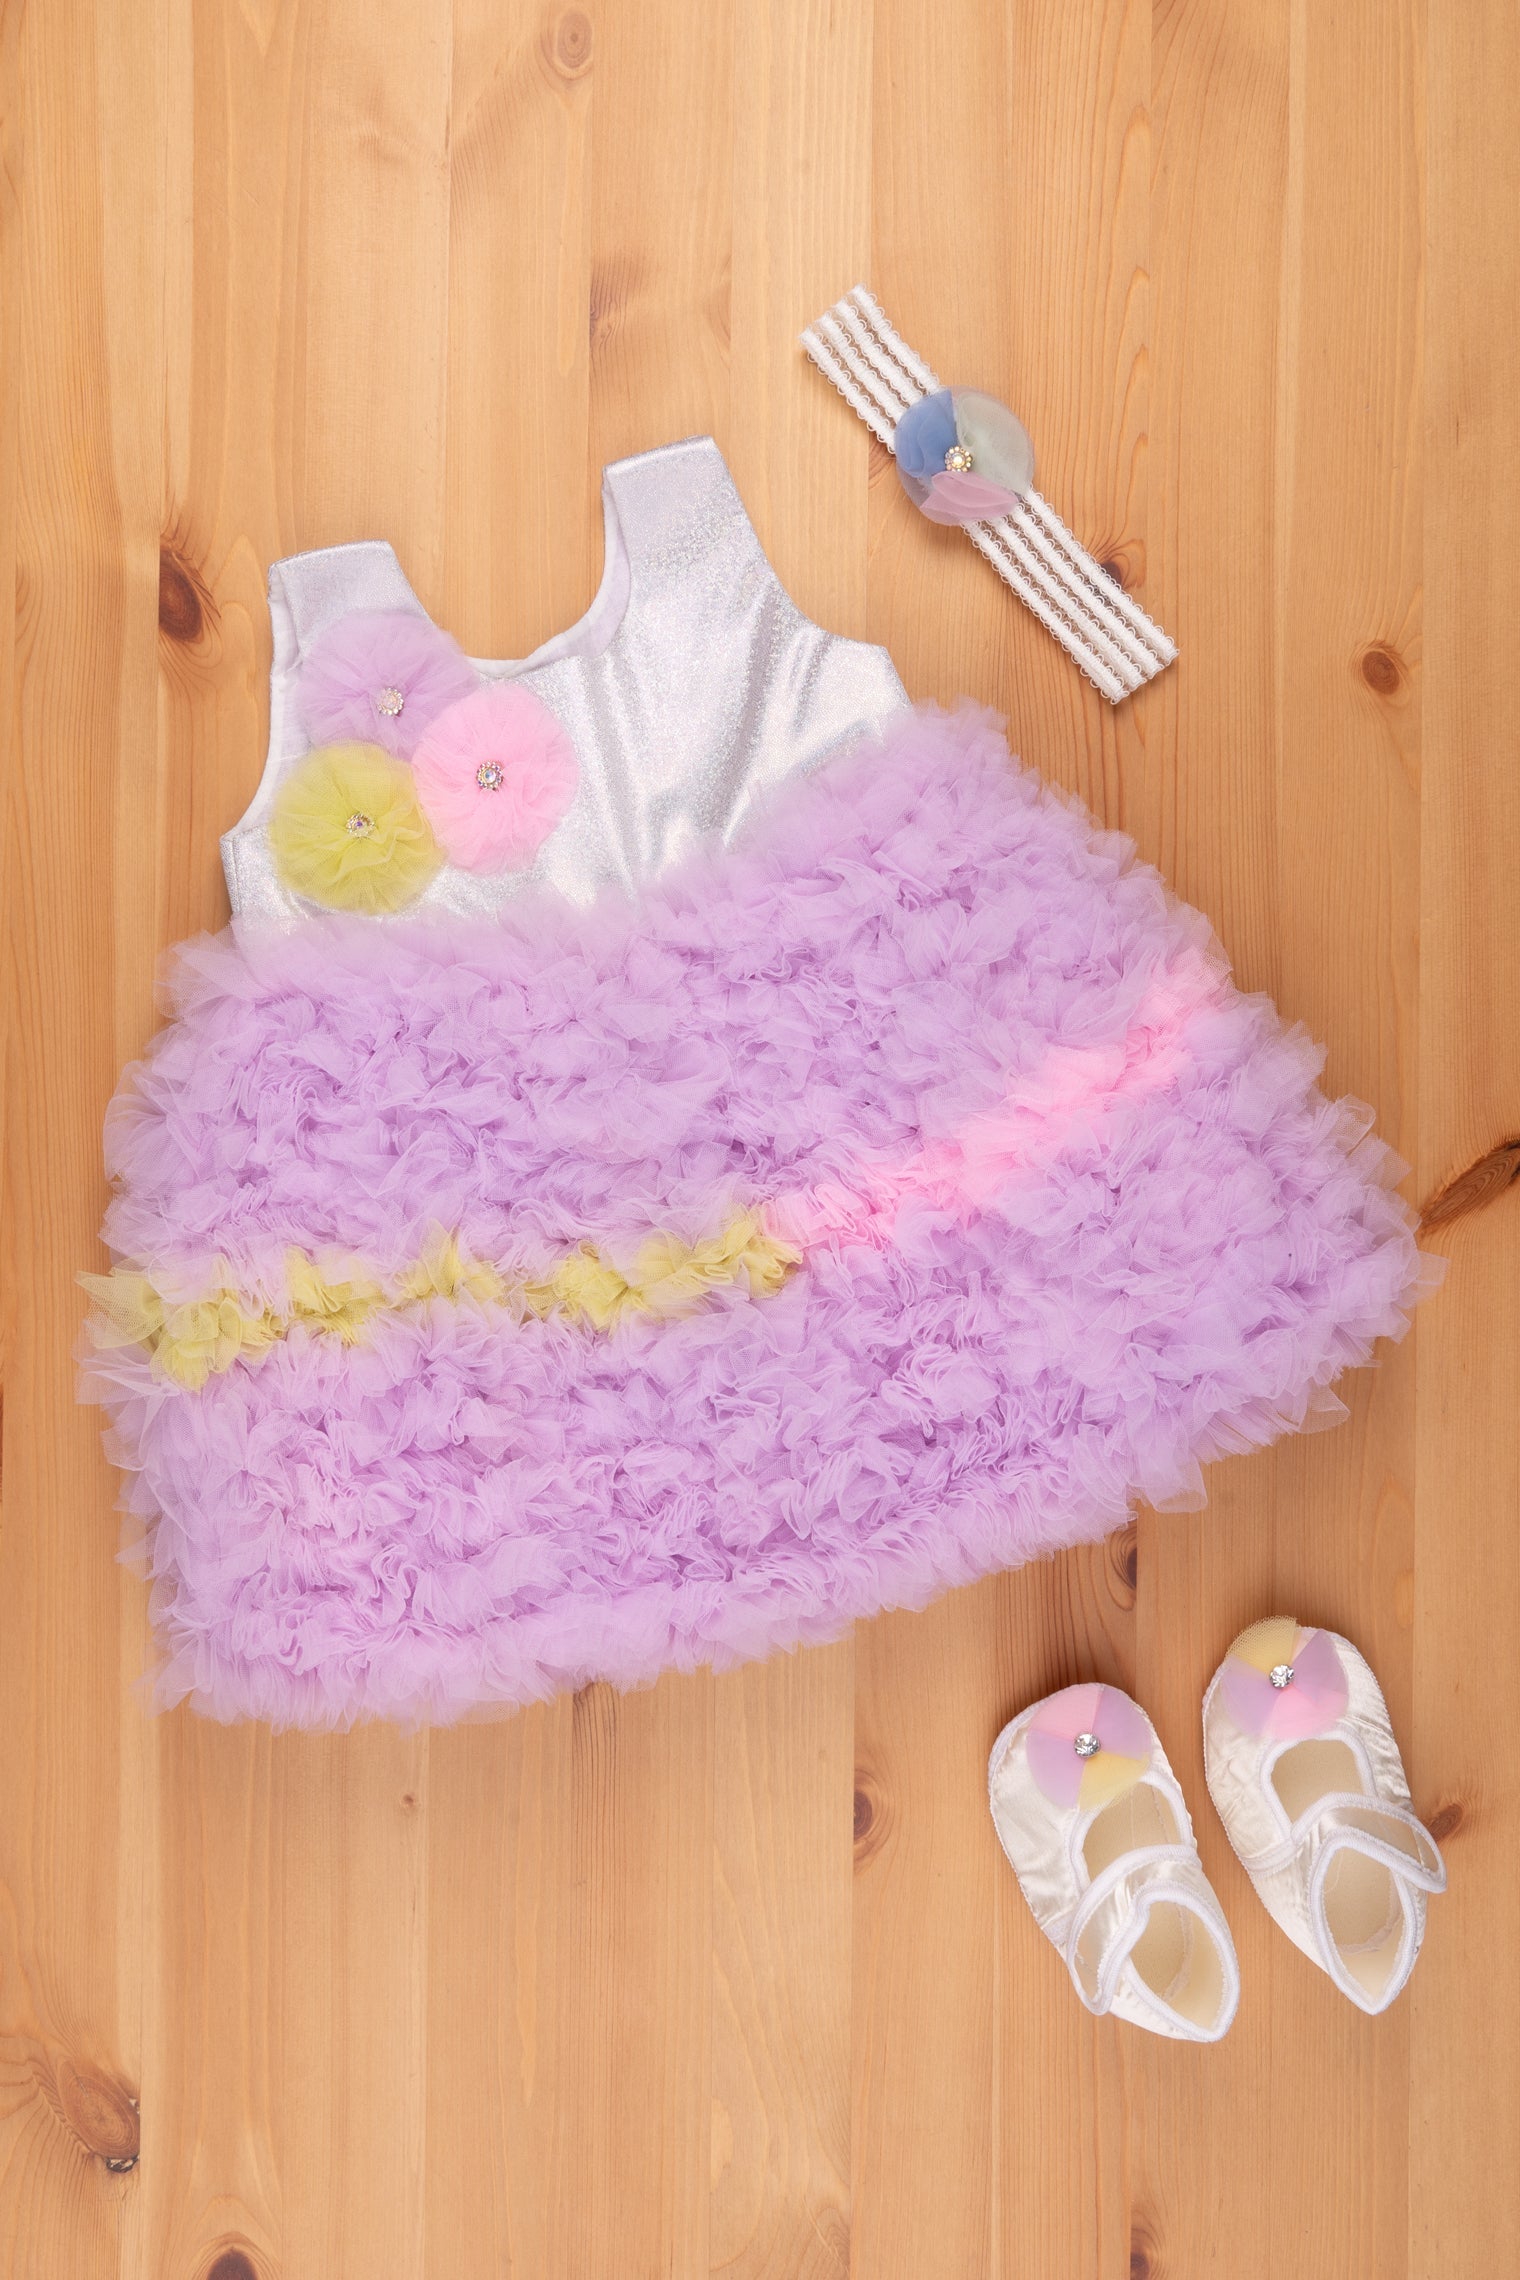 Puffy toddler tutu dress made of tulle and lace - Short girl tutu yell